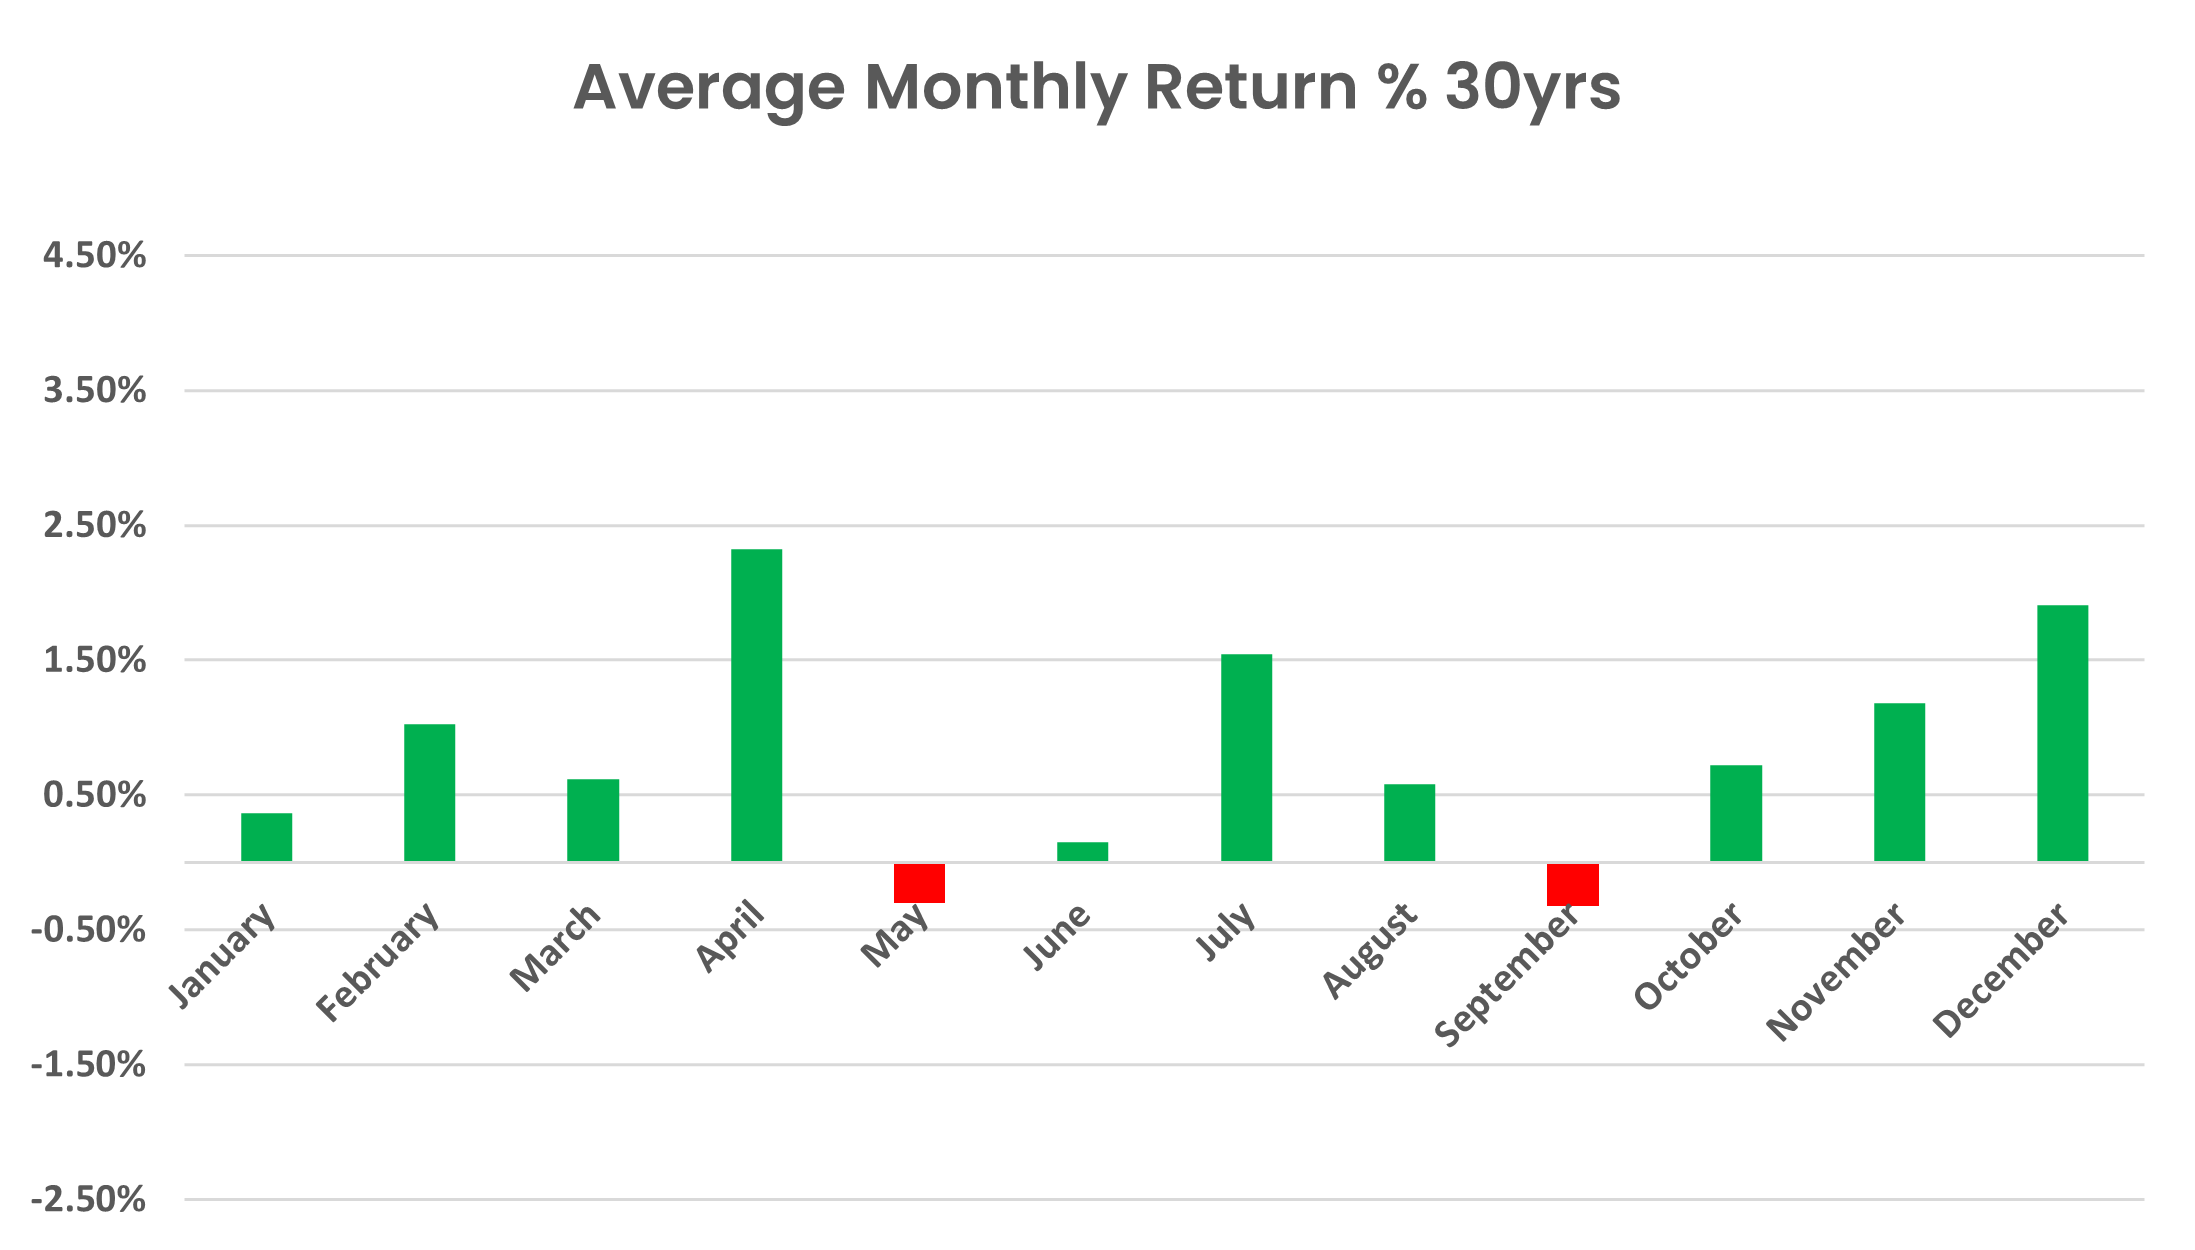 Monthly performance of the All Ordinaries Total Return Index over the last 30 years